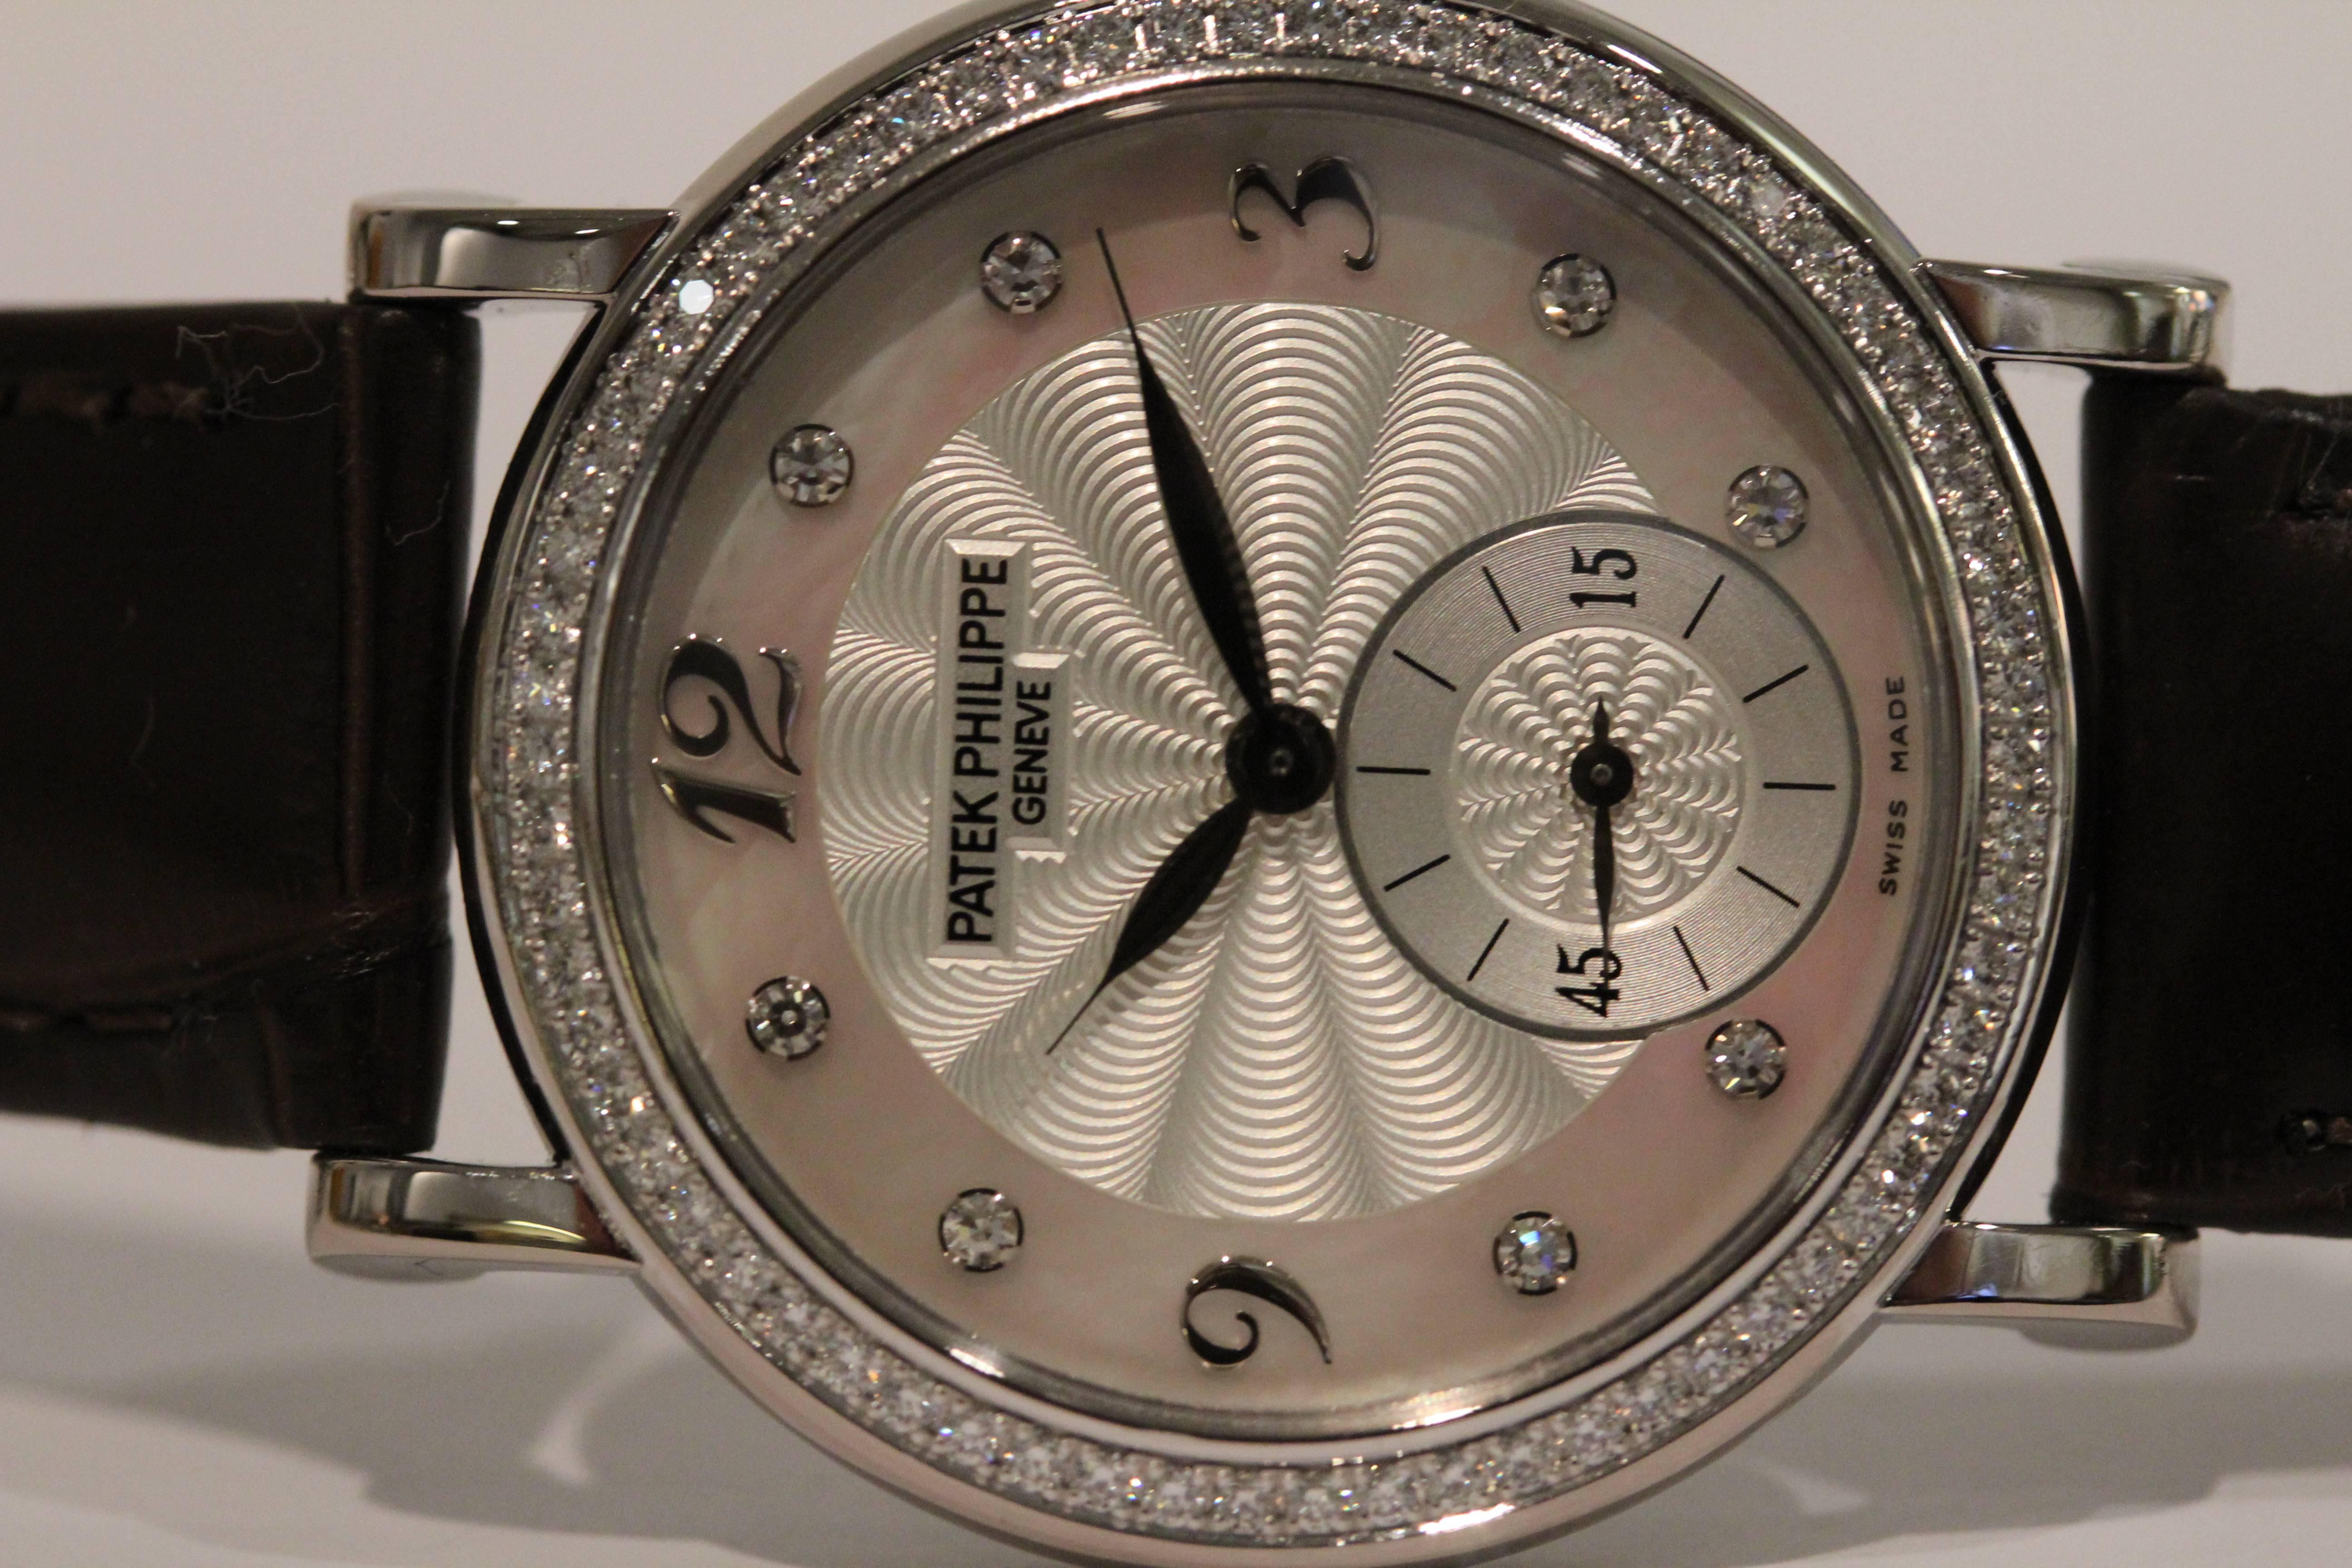 18 karat white gold Patek Philippe with a mother of pearl dial. Diamond hour markers and bezel. 4959G